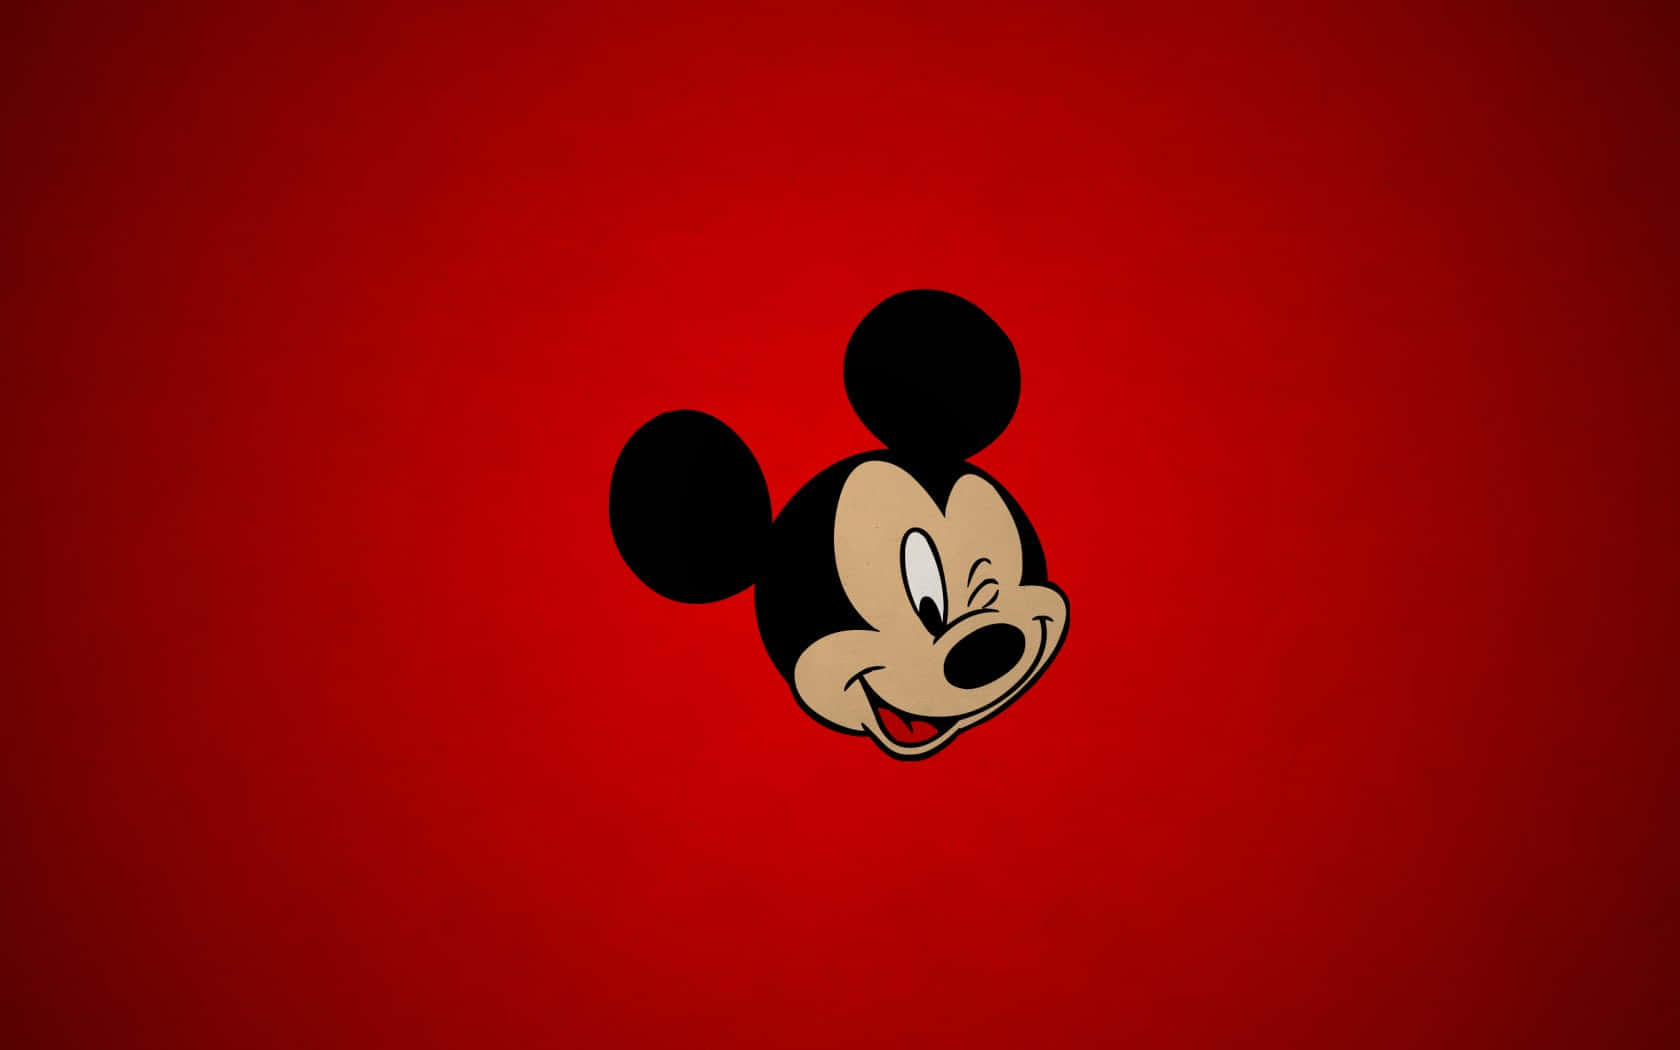 Fun and Exciting Desktop Wallpaper- Mickey Mouse Wallpaper